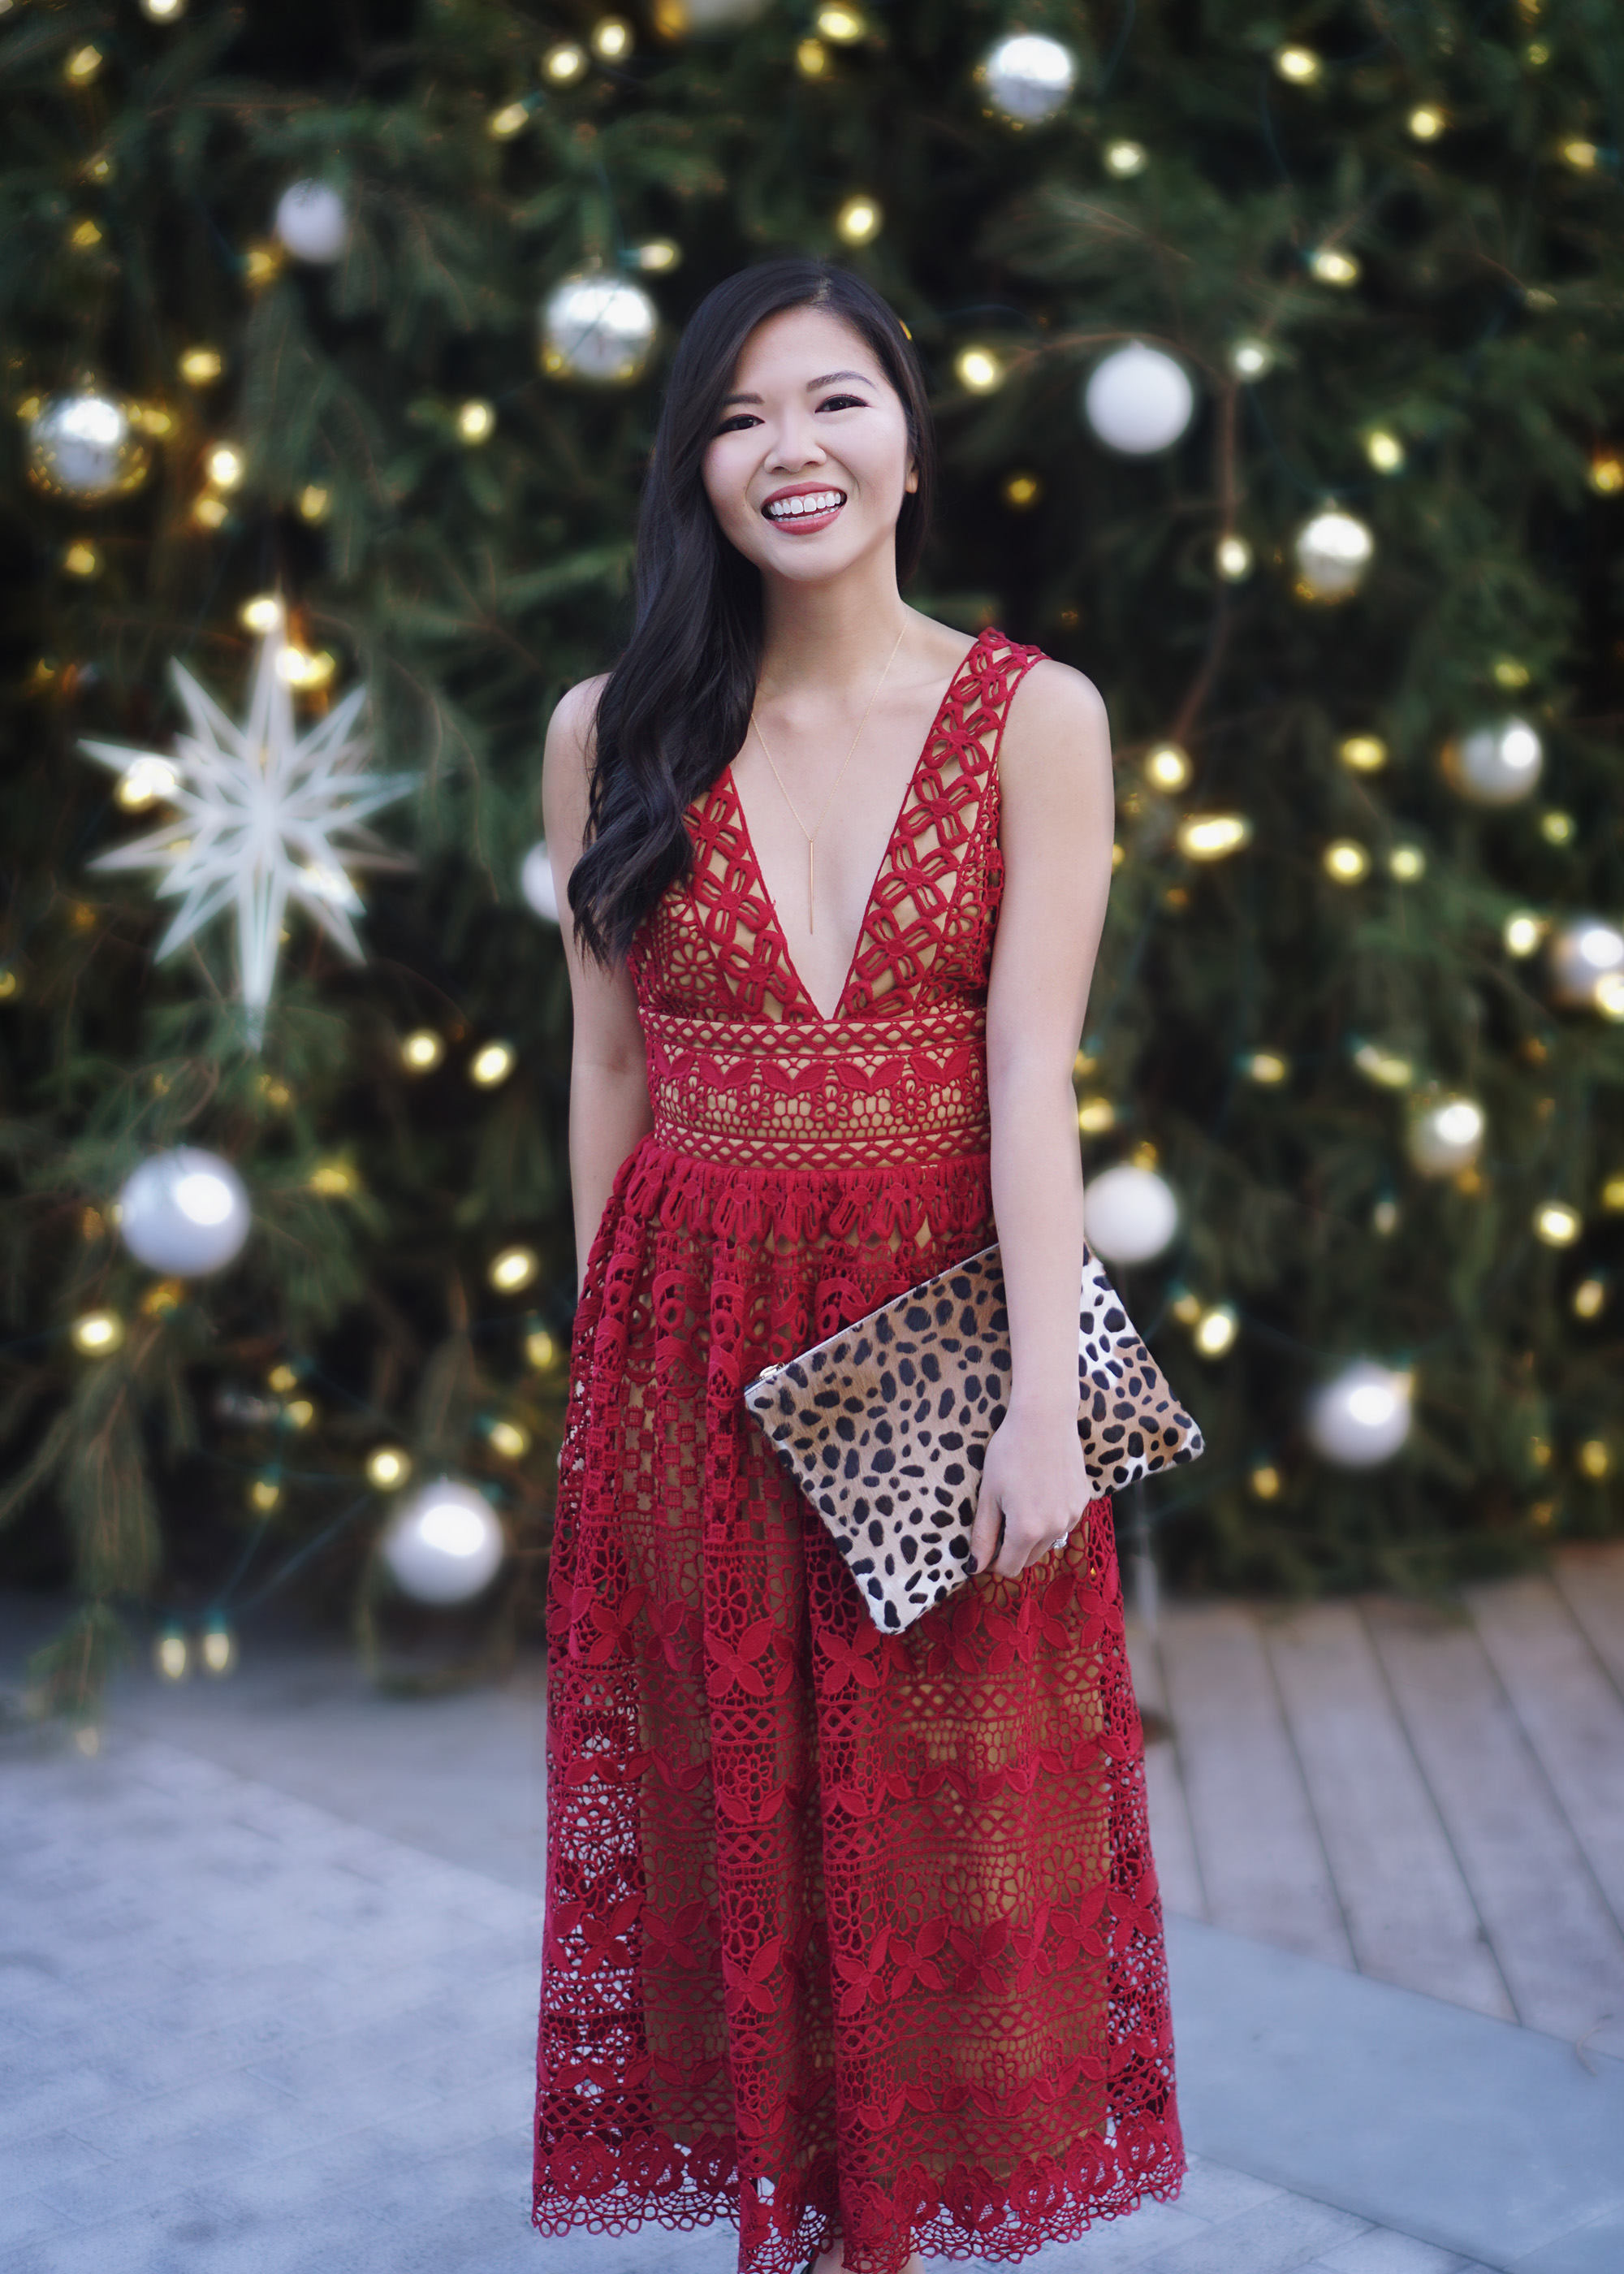 Holiday Party Outfit Ideas: Red Lace Dress